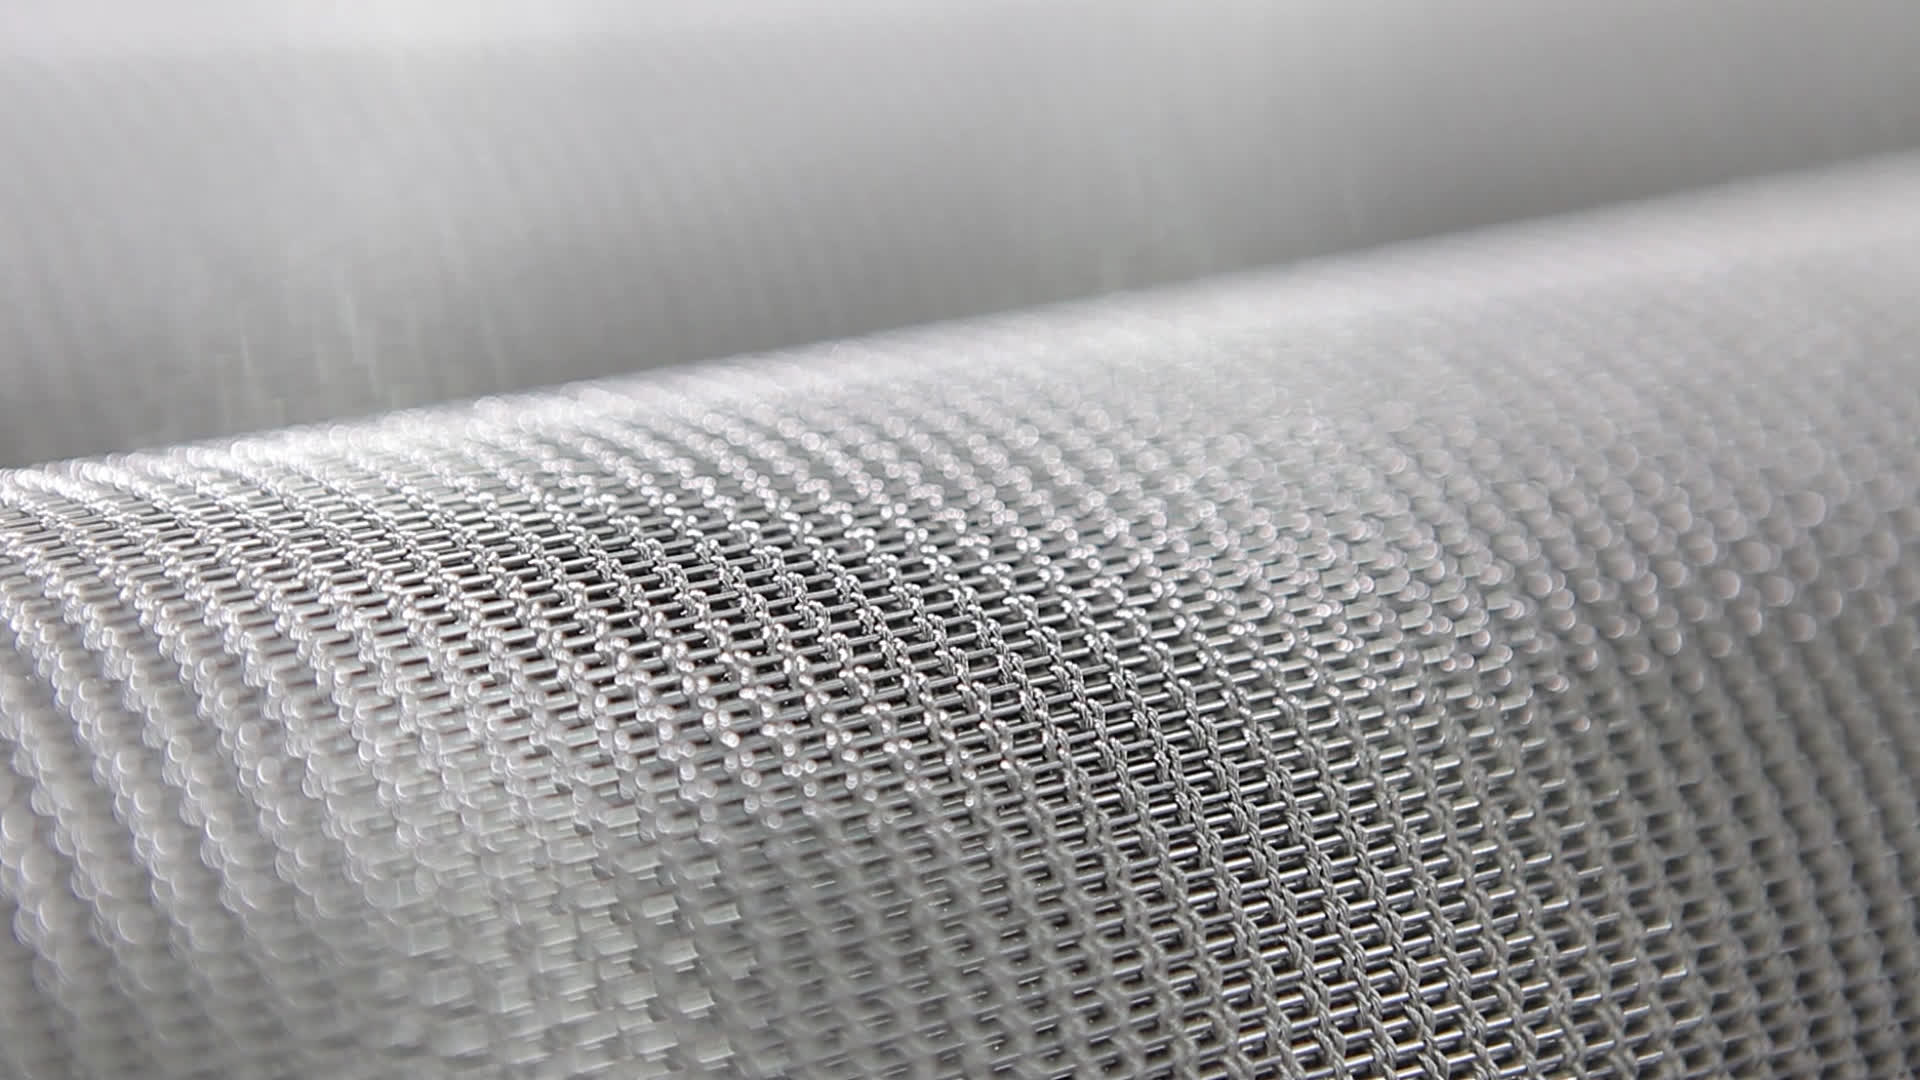 Woven structures for industrial applications